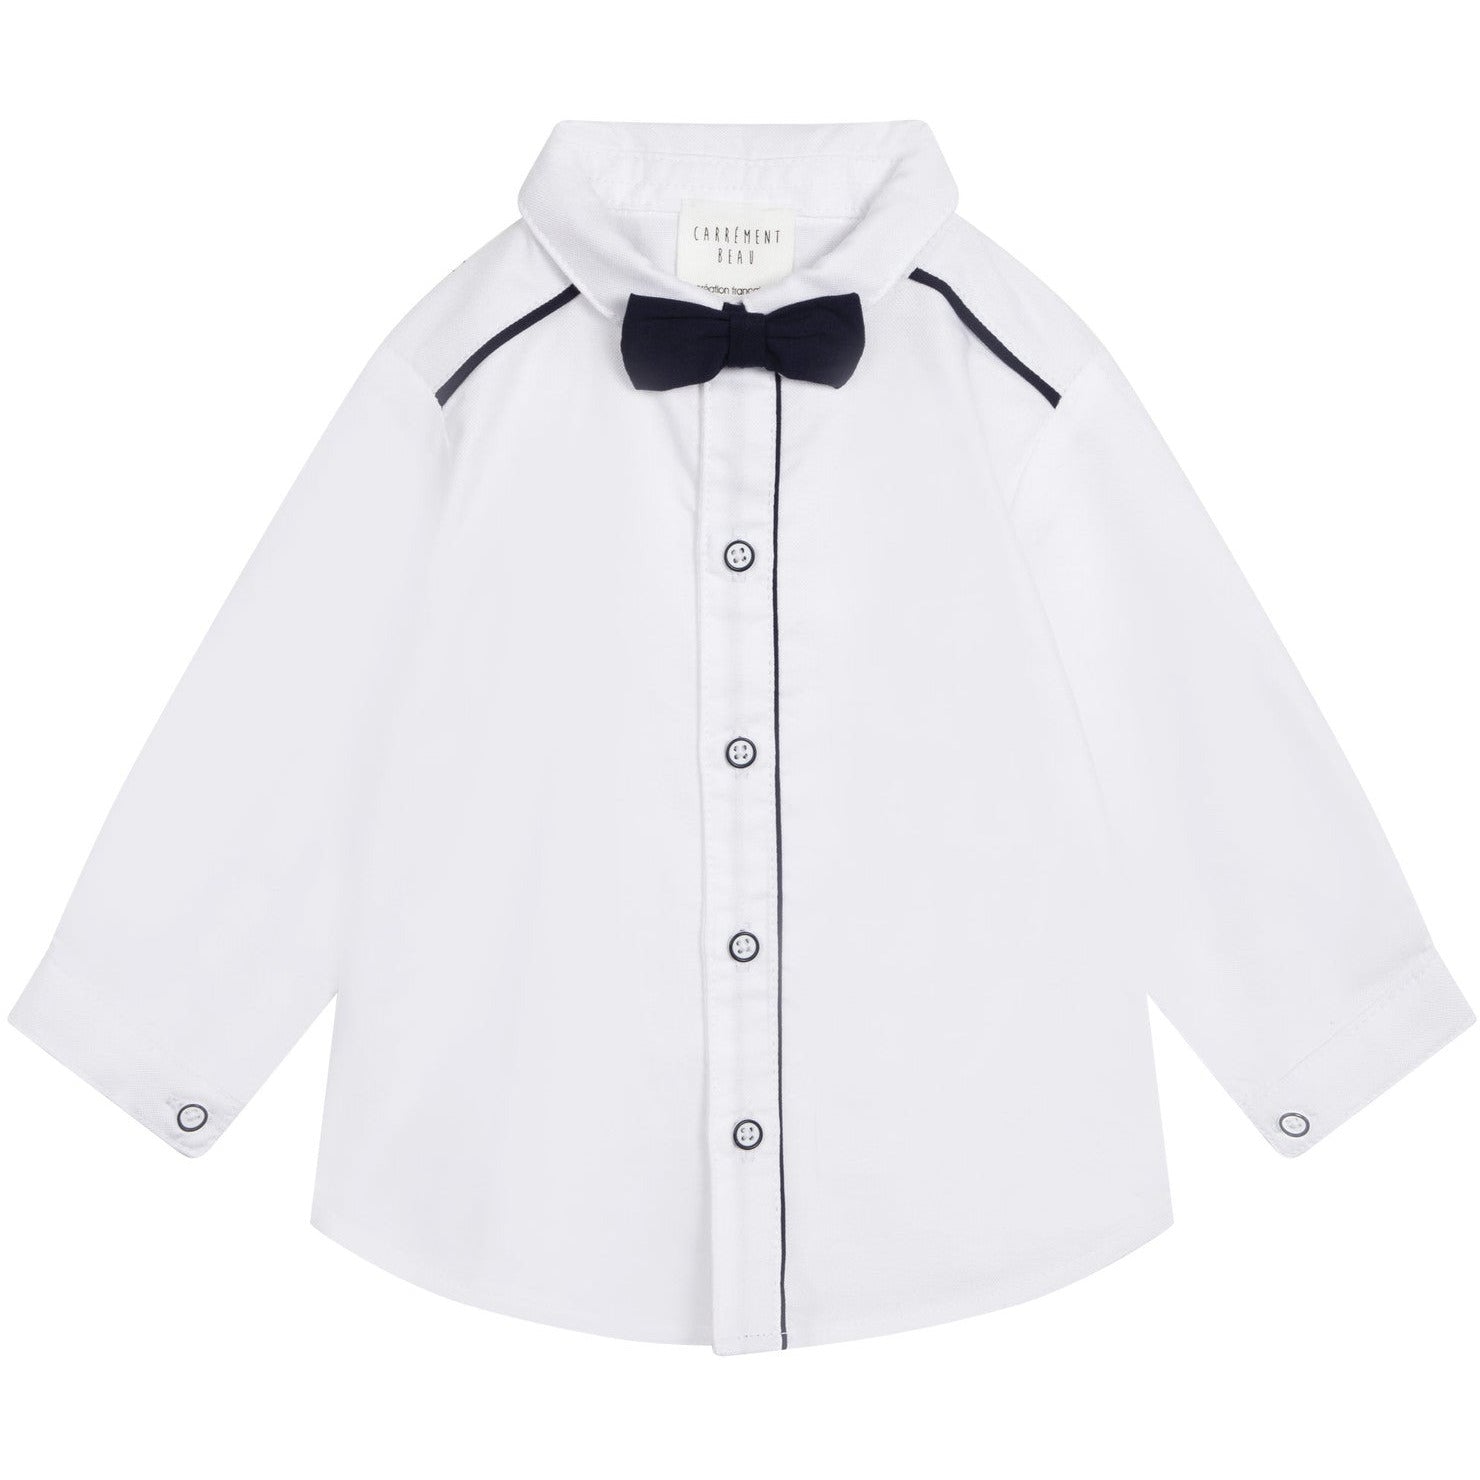 BOW TIE BUTTON UP SHIRT